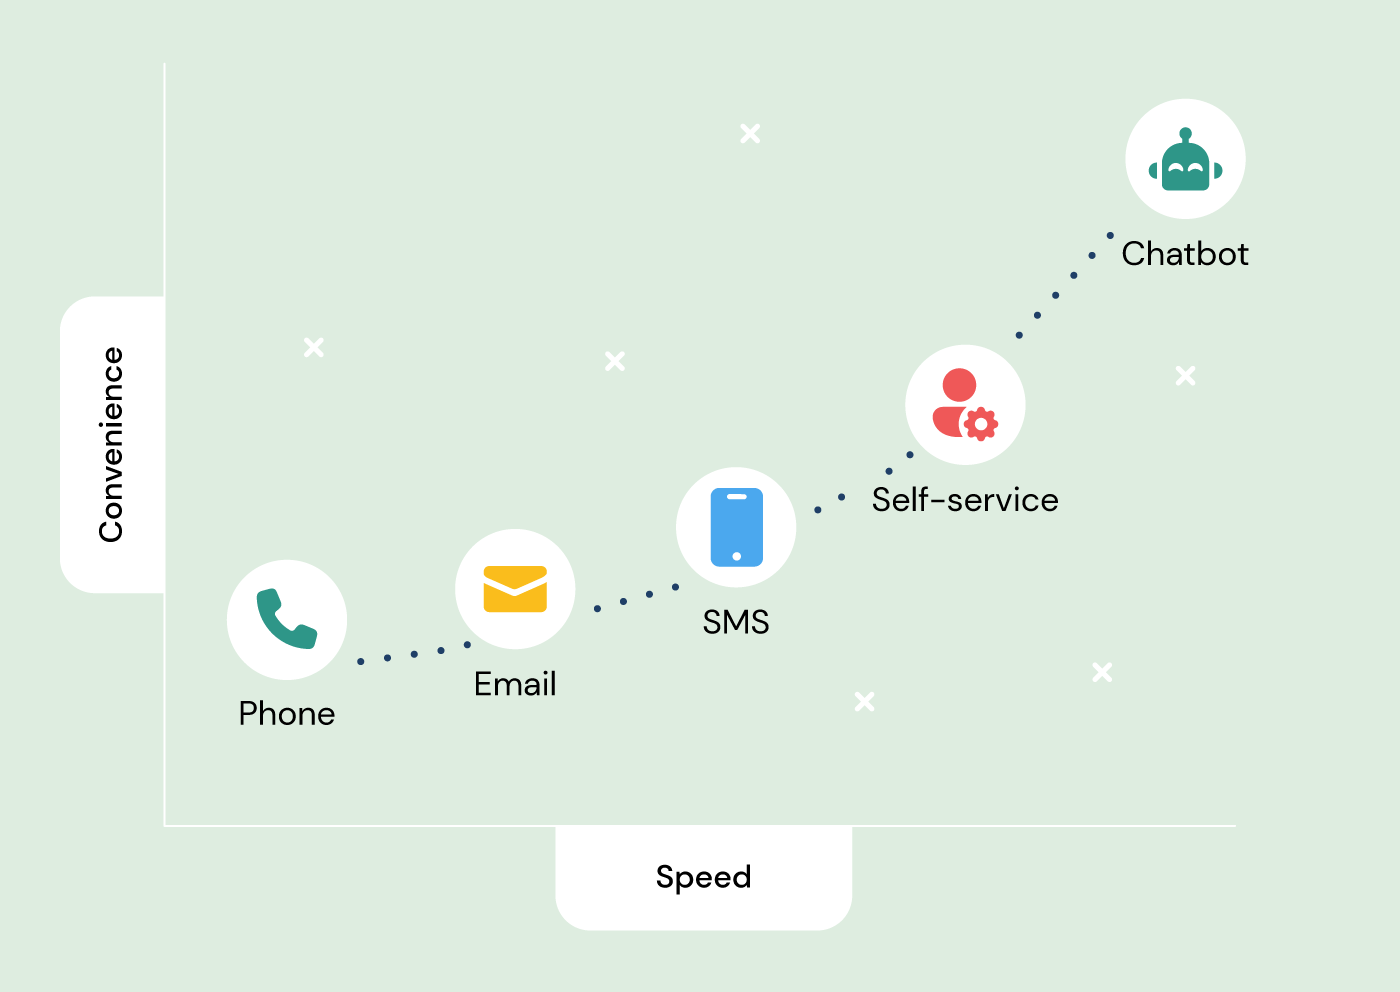 A graph shows the value of different channels comparing convenience and speed, from phone to email to SMS to self service to chatbots, in that order